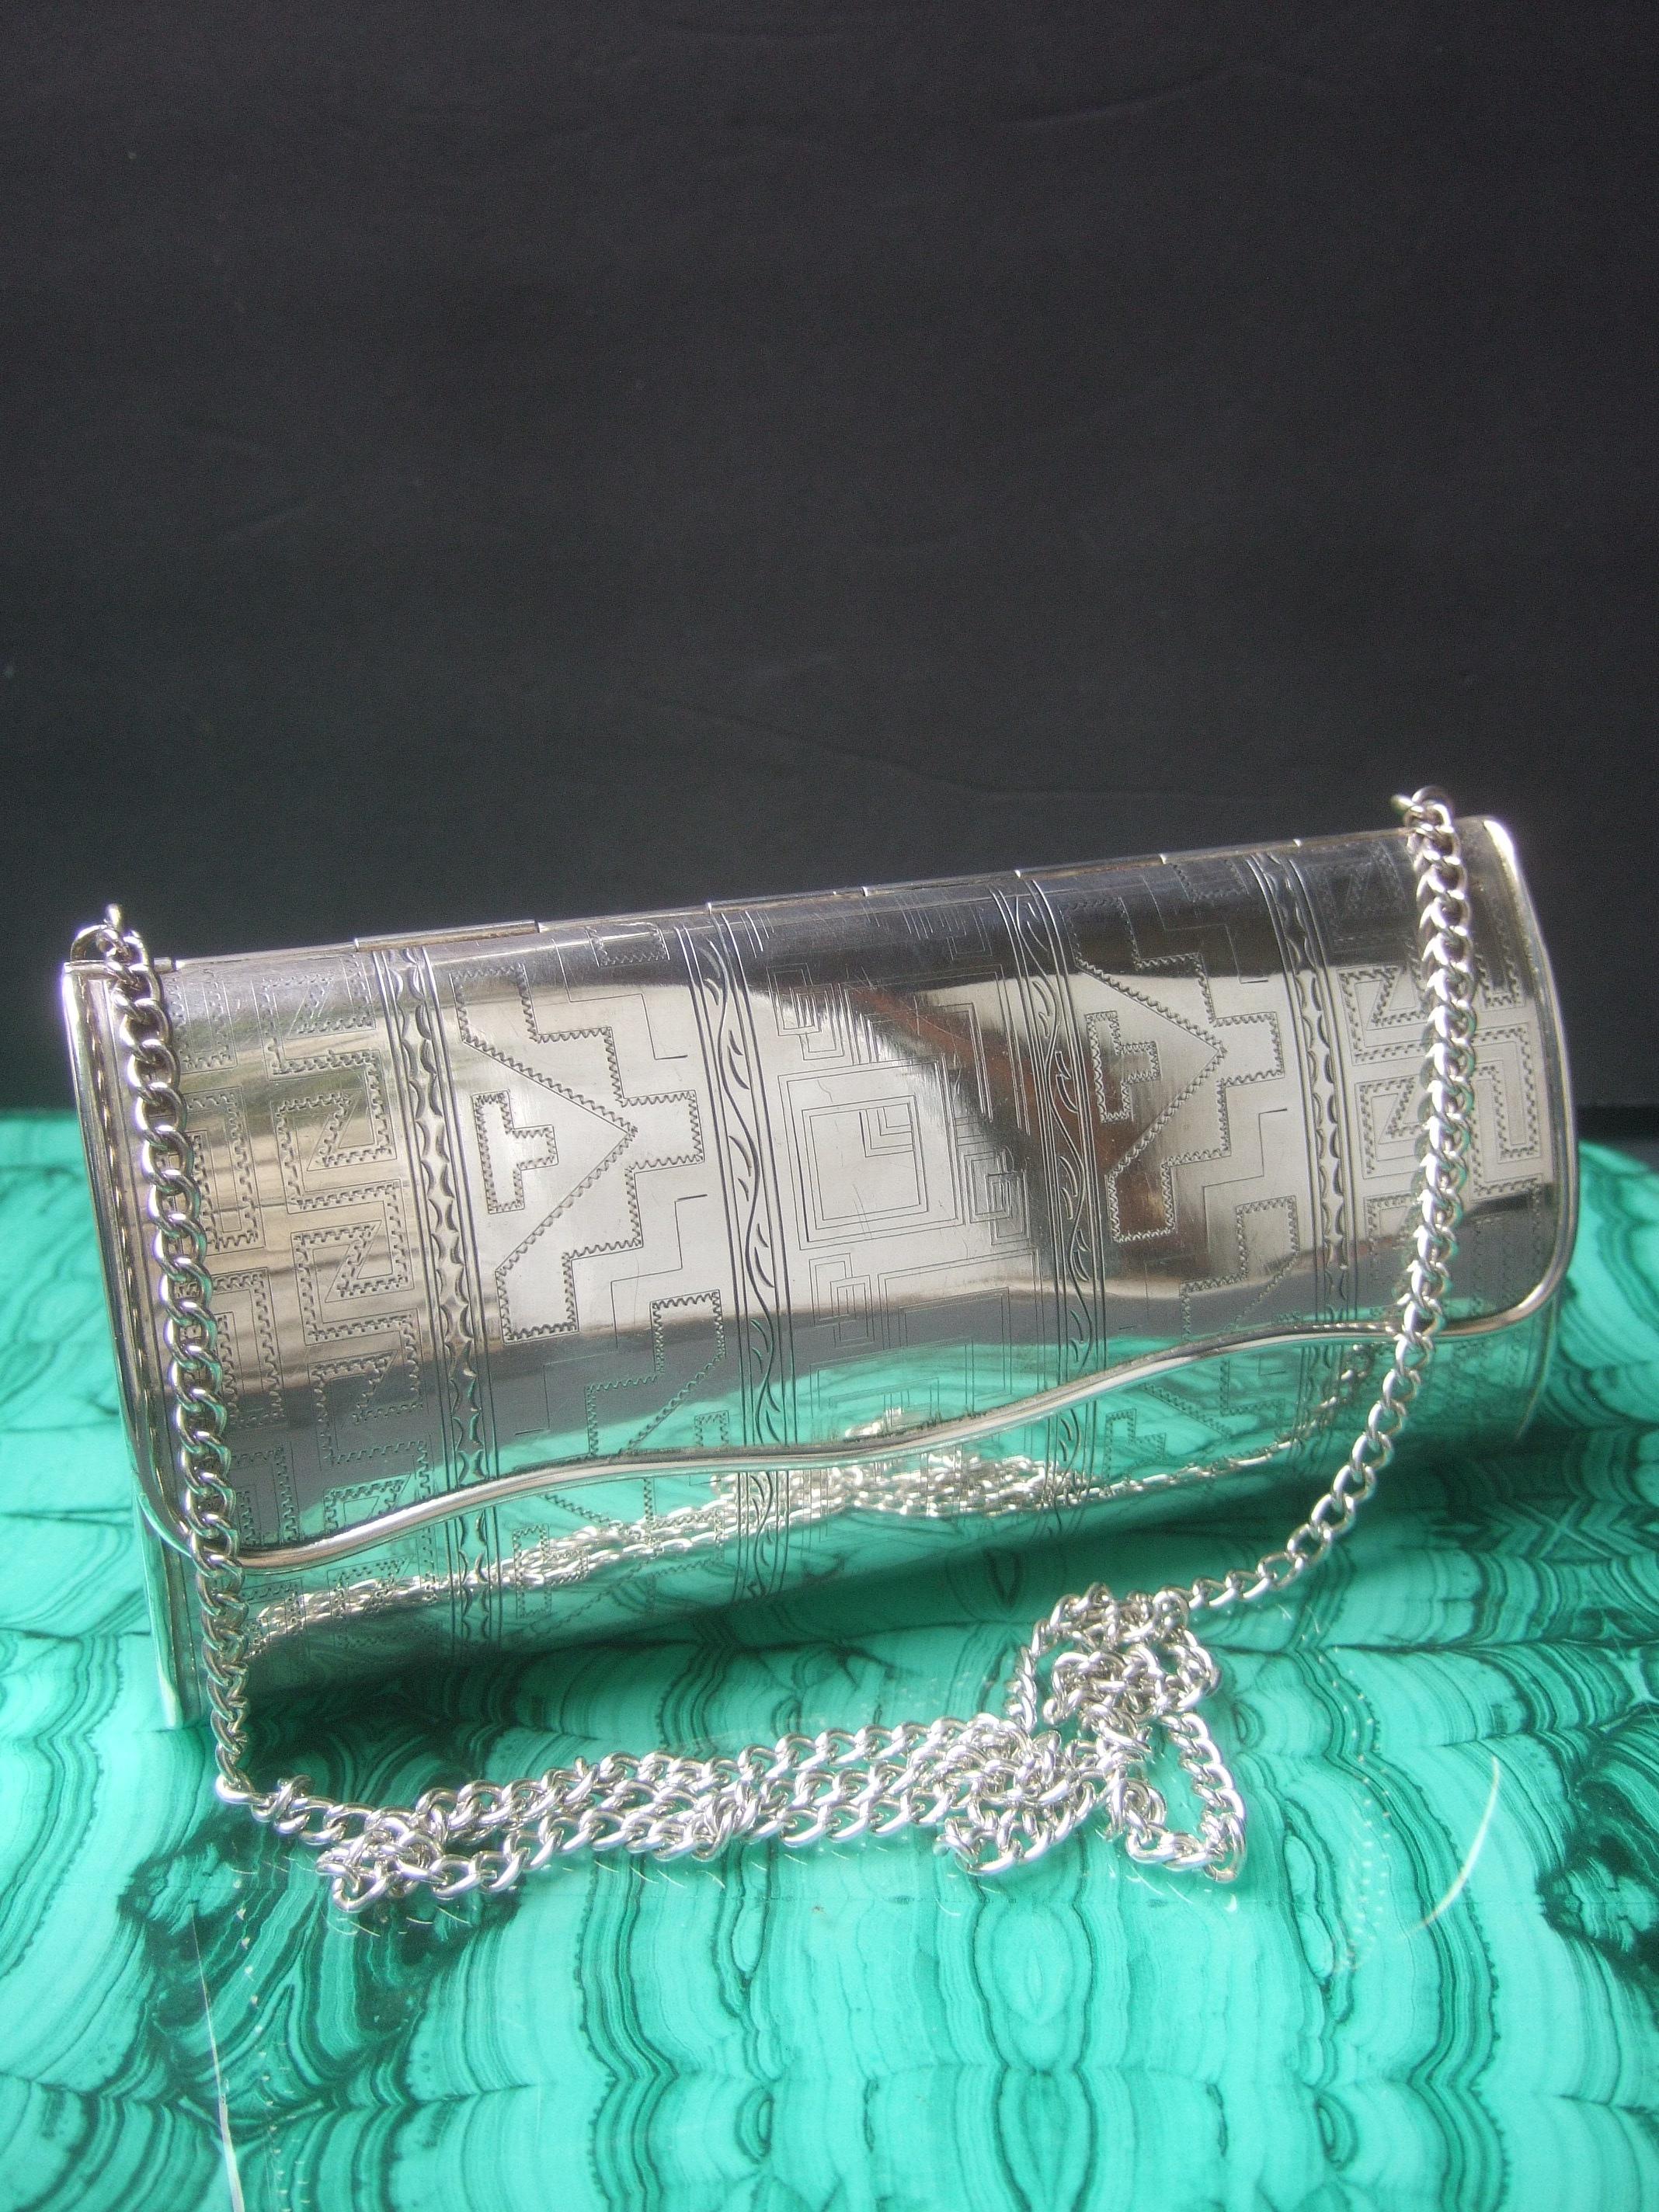 Opulent sterling silver artisan minaudiere' evening bag c 1970s
The exquisite sterling silver minaudiere' is embellished with intricate subtle geometric impressed designs on the exterior

The elongated oval-shaped sides in contrast are smooth shiny